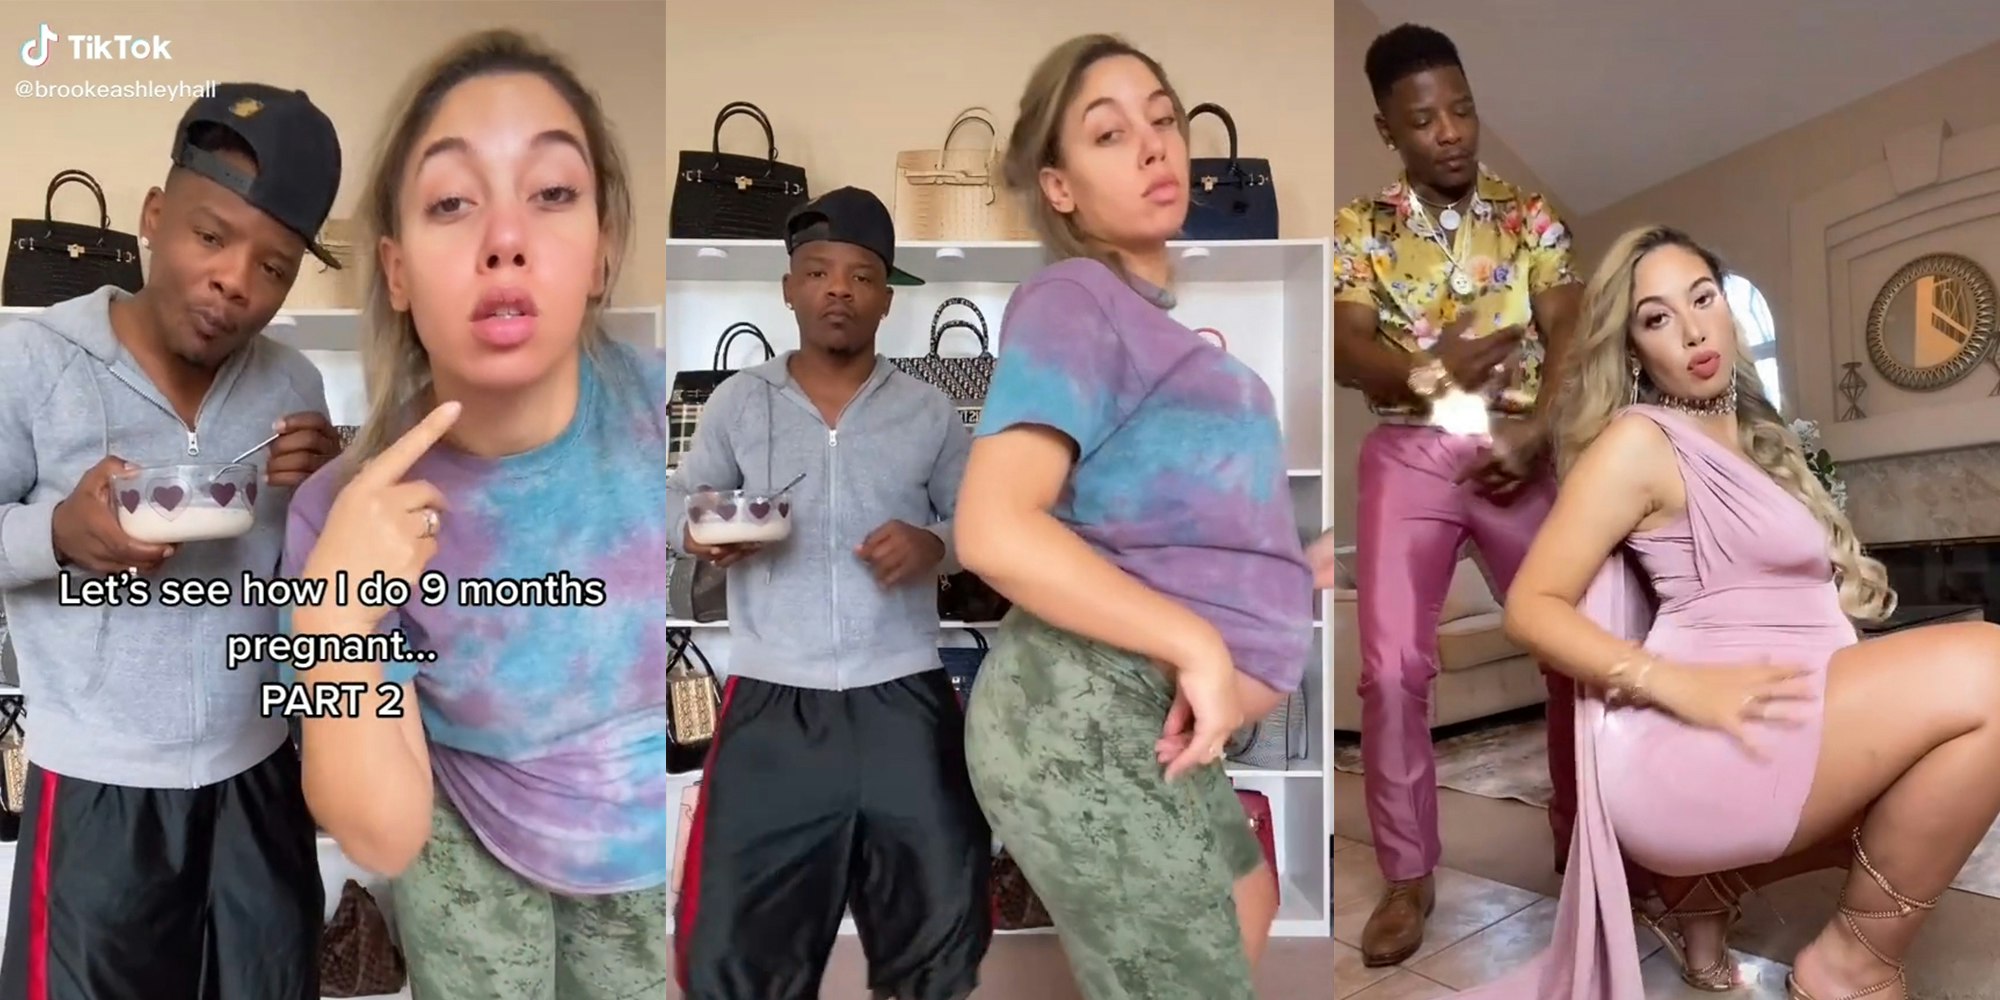 man and 9 months pregnant woman doing tiktok "buss it" challenge, going from casual clothes to high fashion